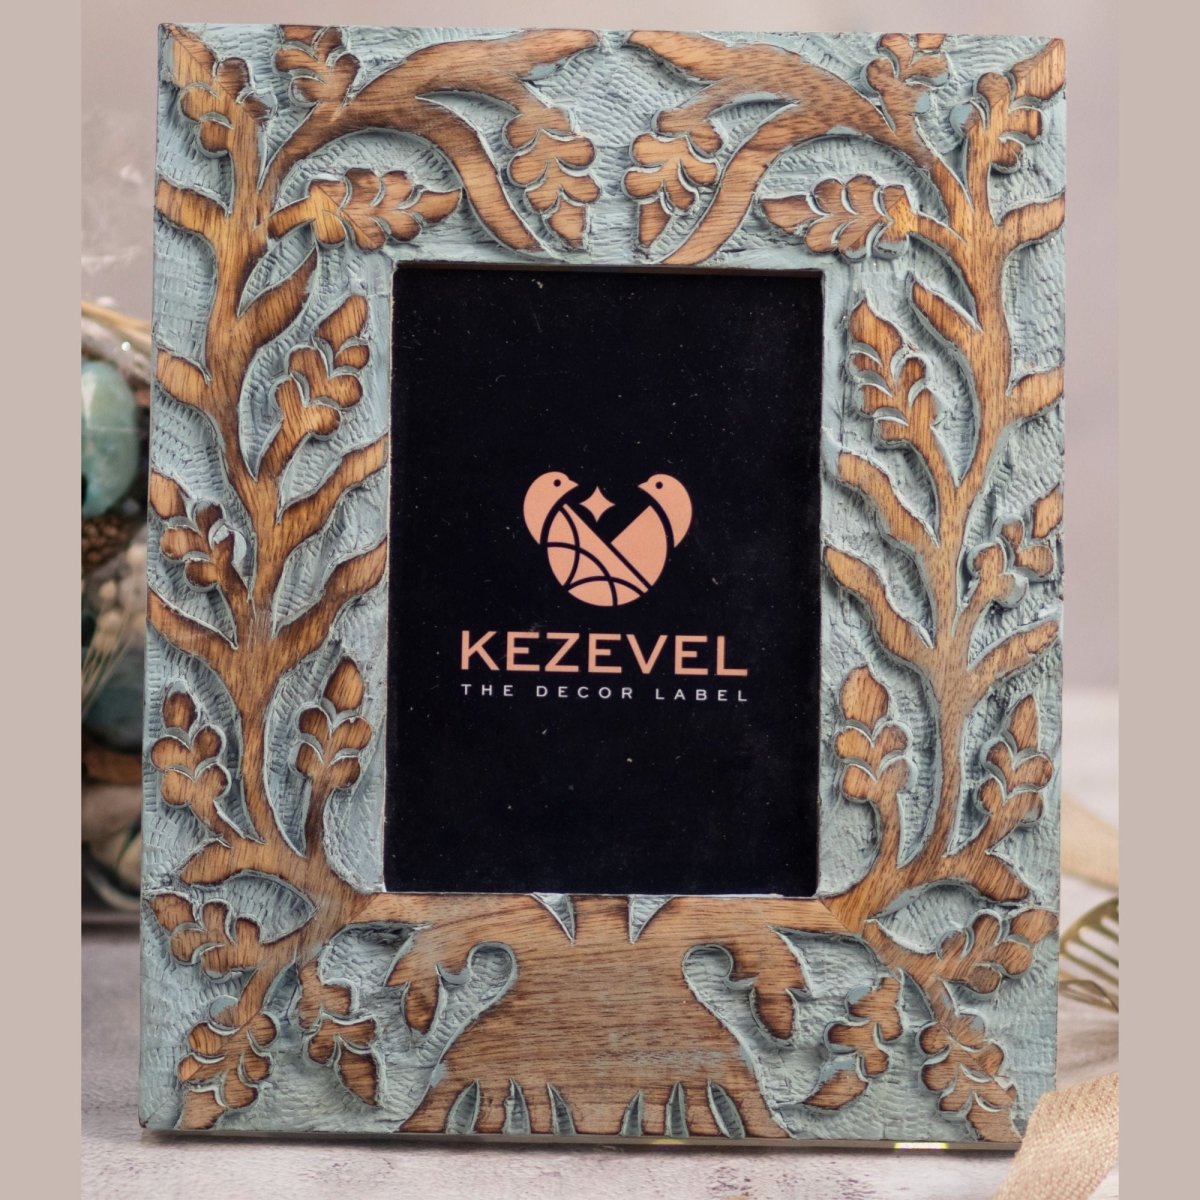 Kezevel Carved Wooden Photo Frames - Artistic Rectangle Photo Frame for Table in Brown and Blue for Picture Size 5X7 inch